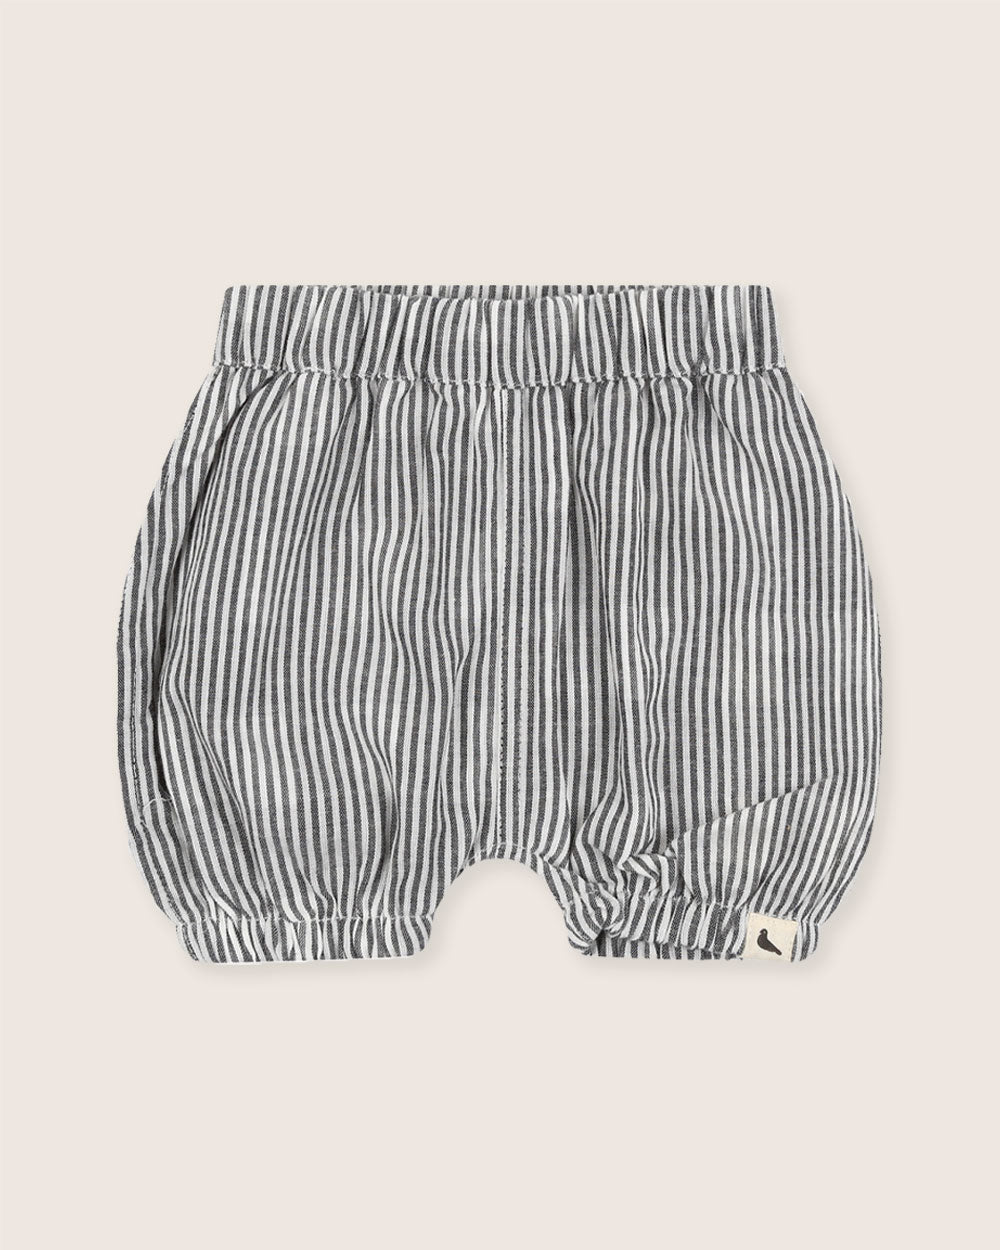 Stripe baby bloomers